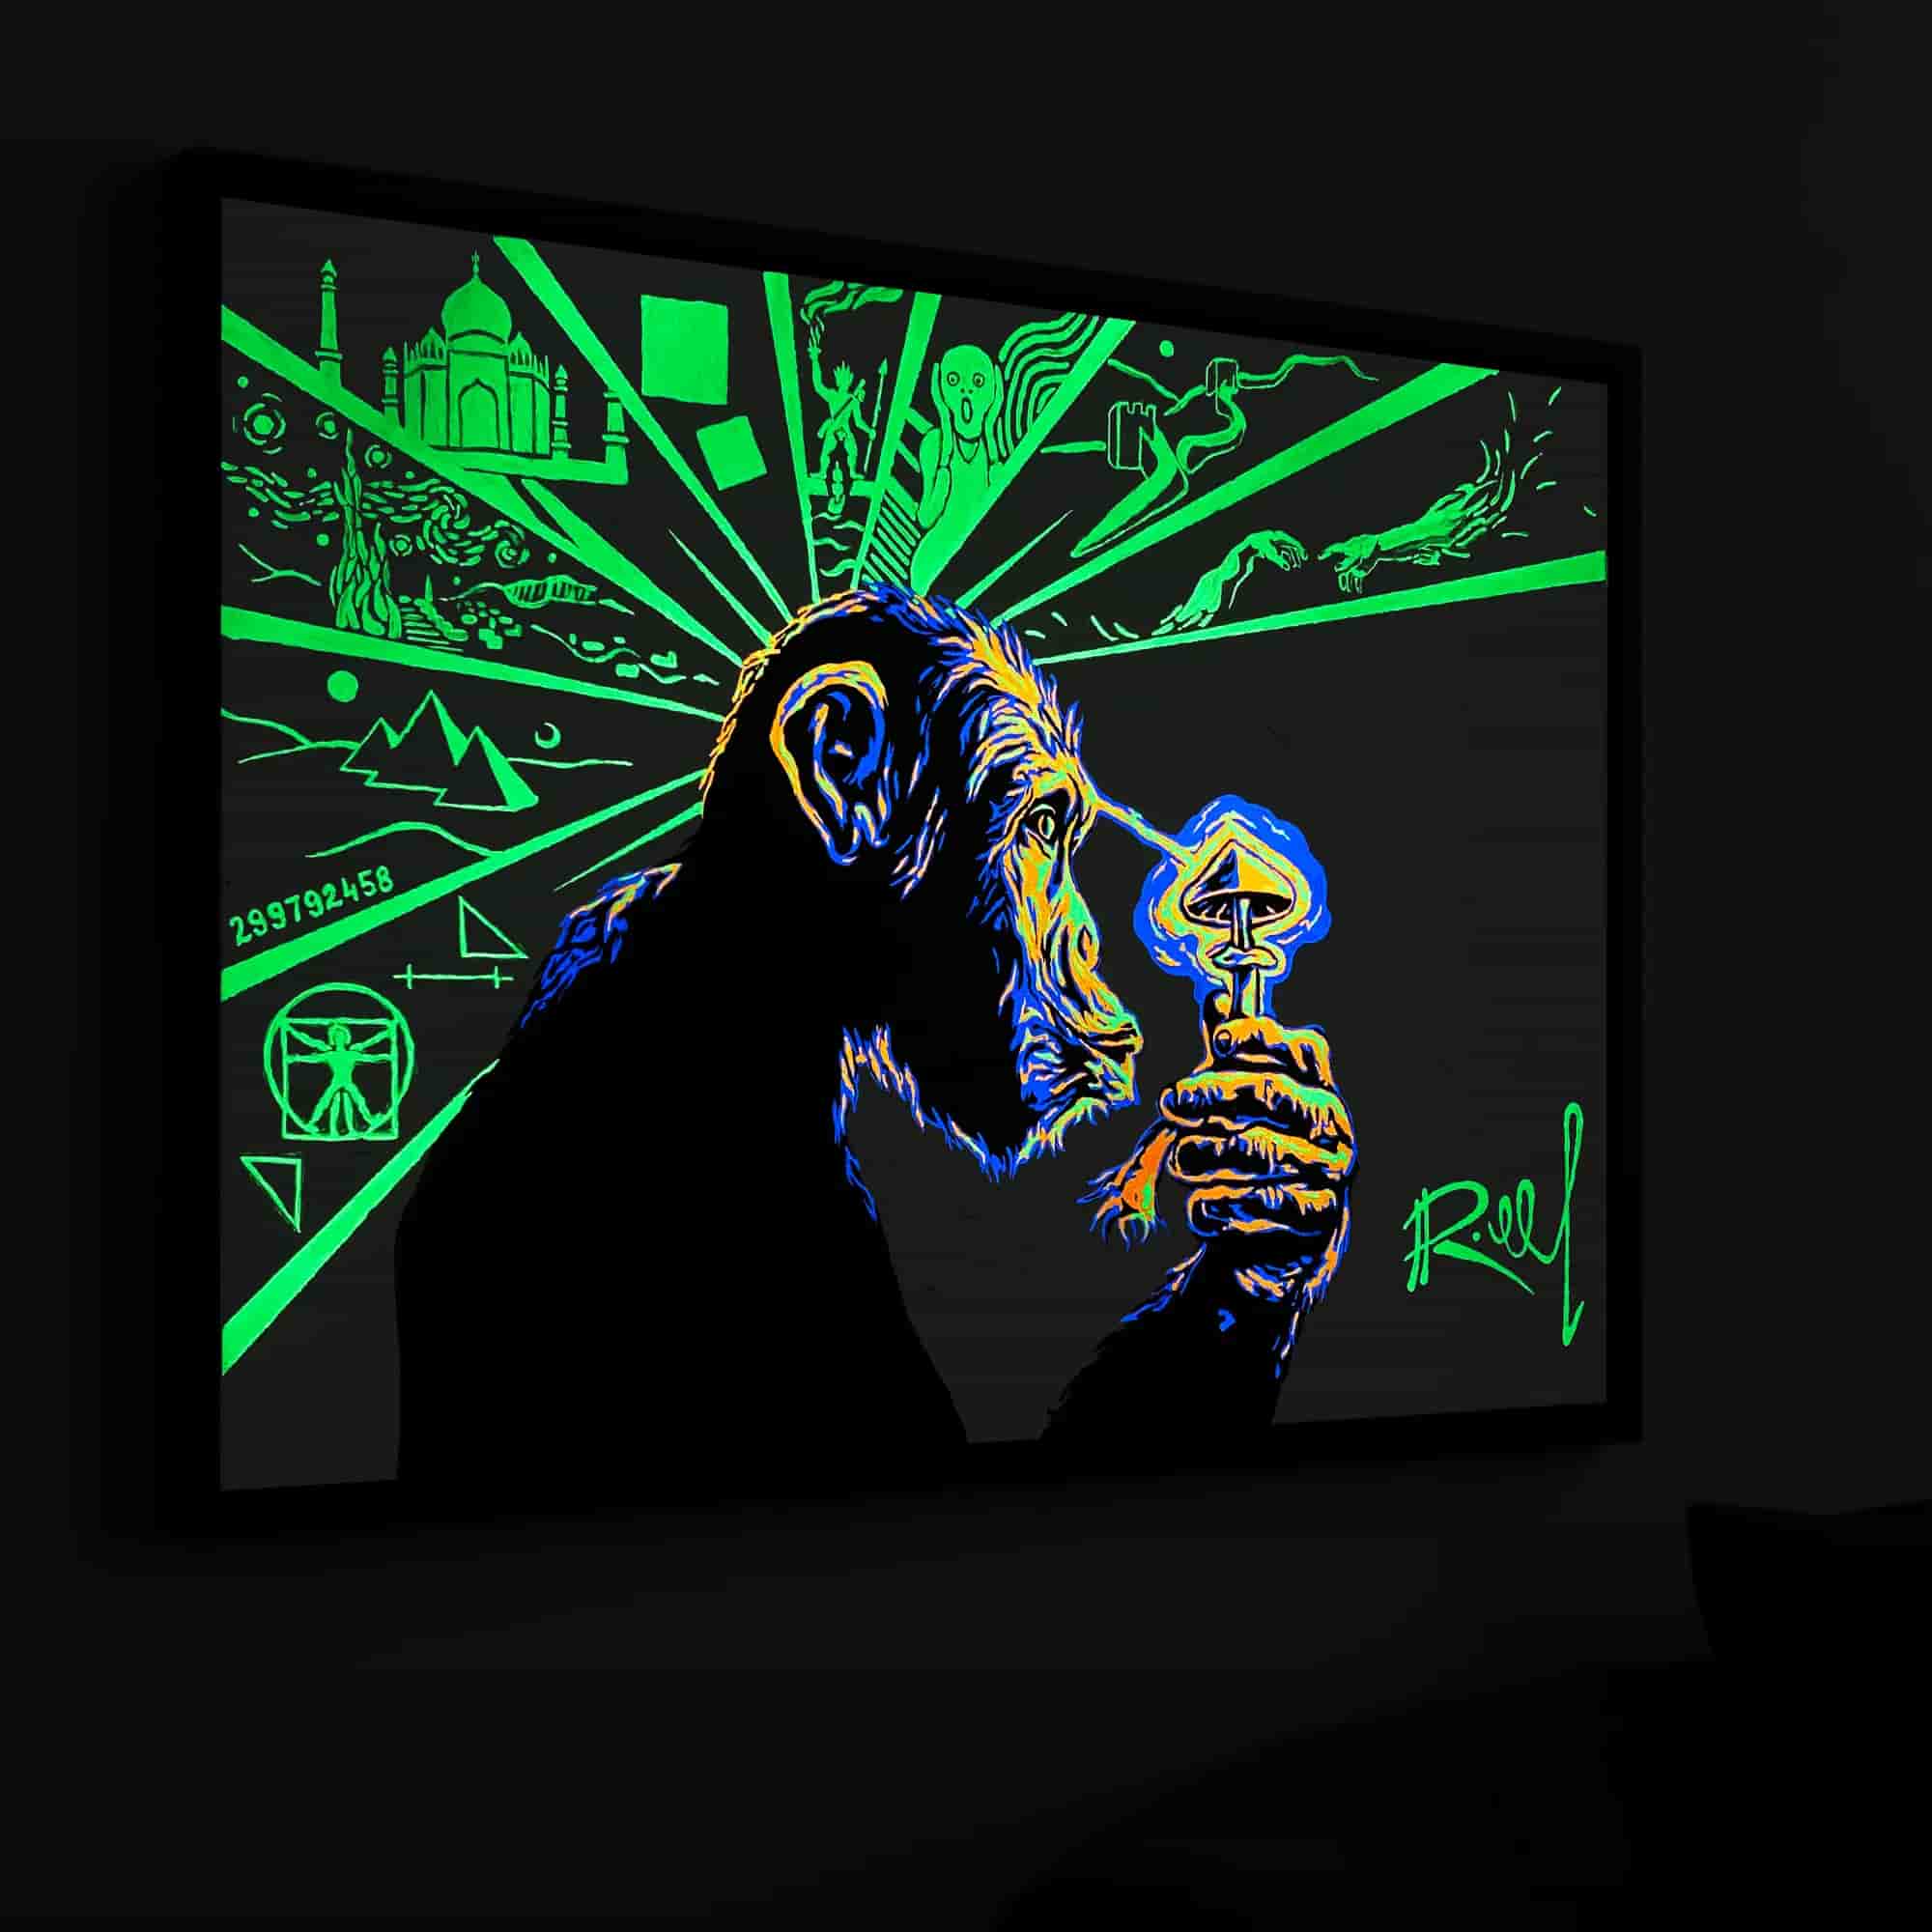 50x70cm Canvas Wall Art - Stoned Ape portrait, a mesmerizing night glow in the dark effect for an enchanting display.